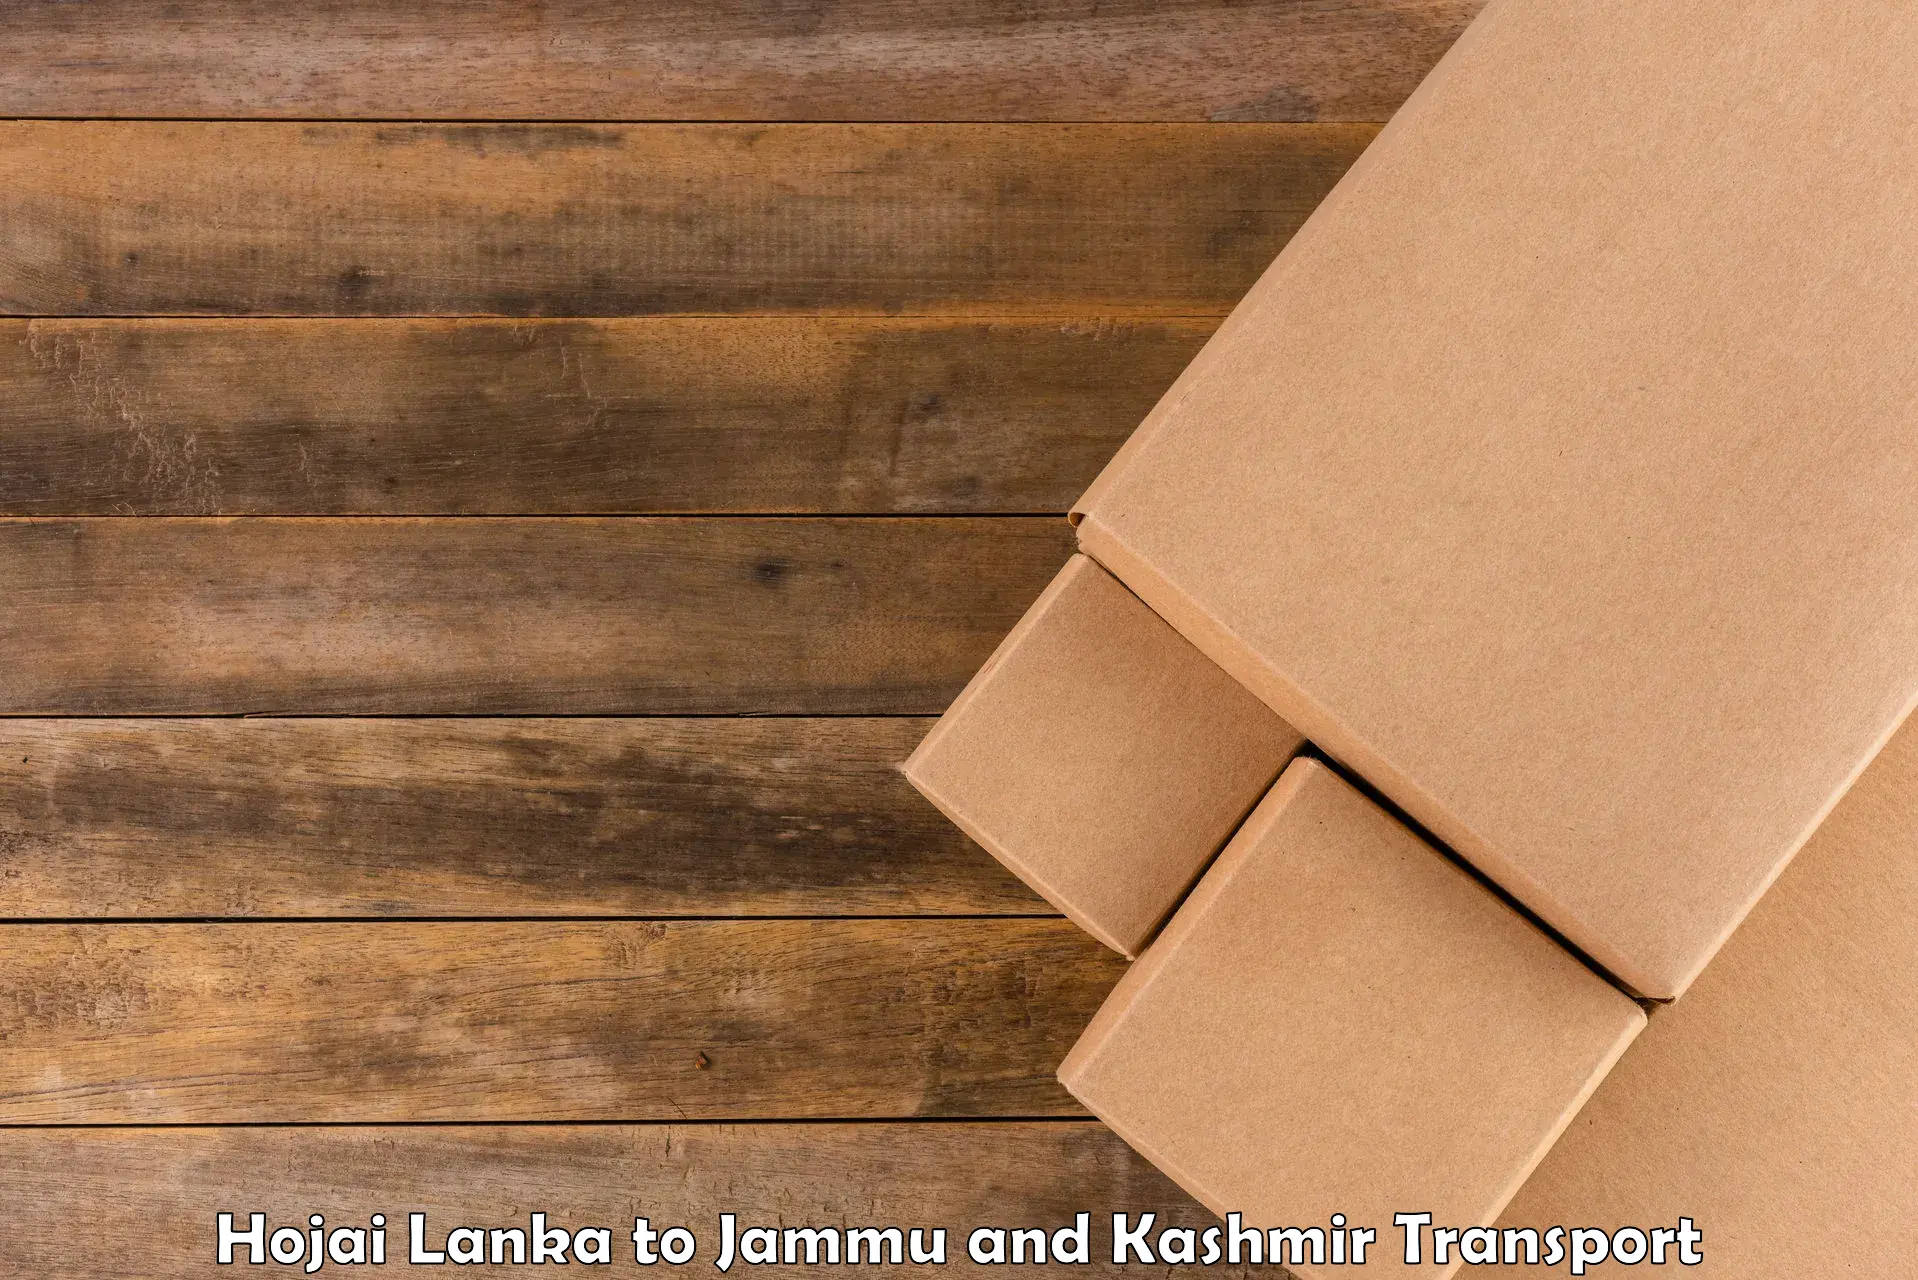 Package delivery services Hojai Lanka to University of Jammu